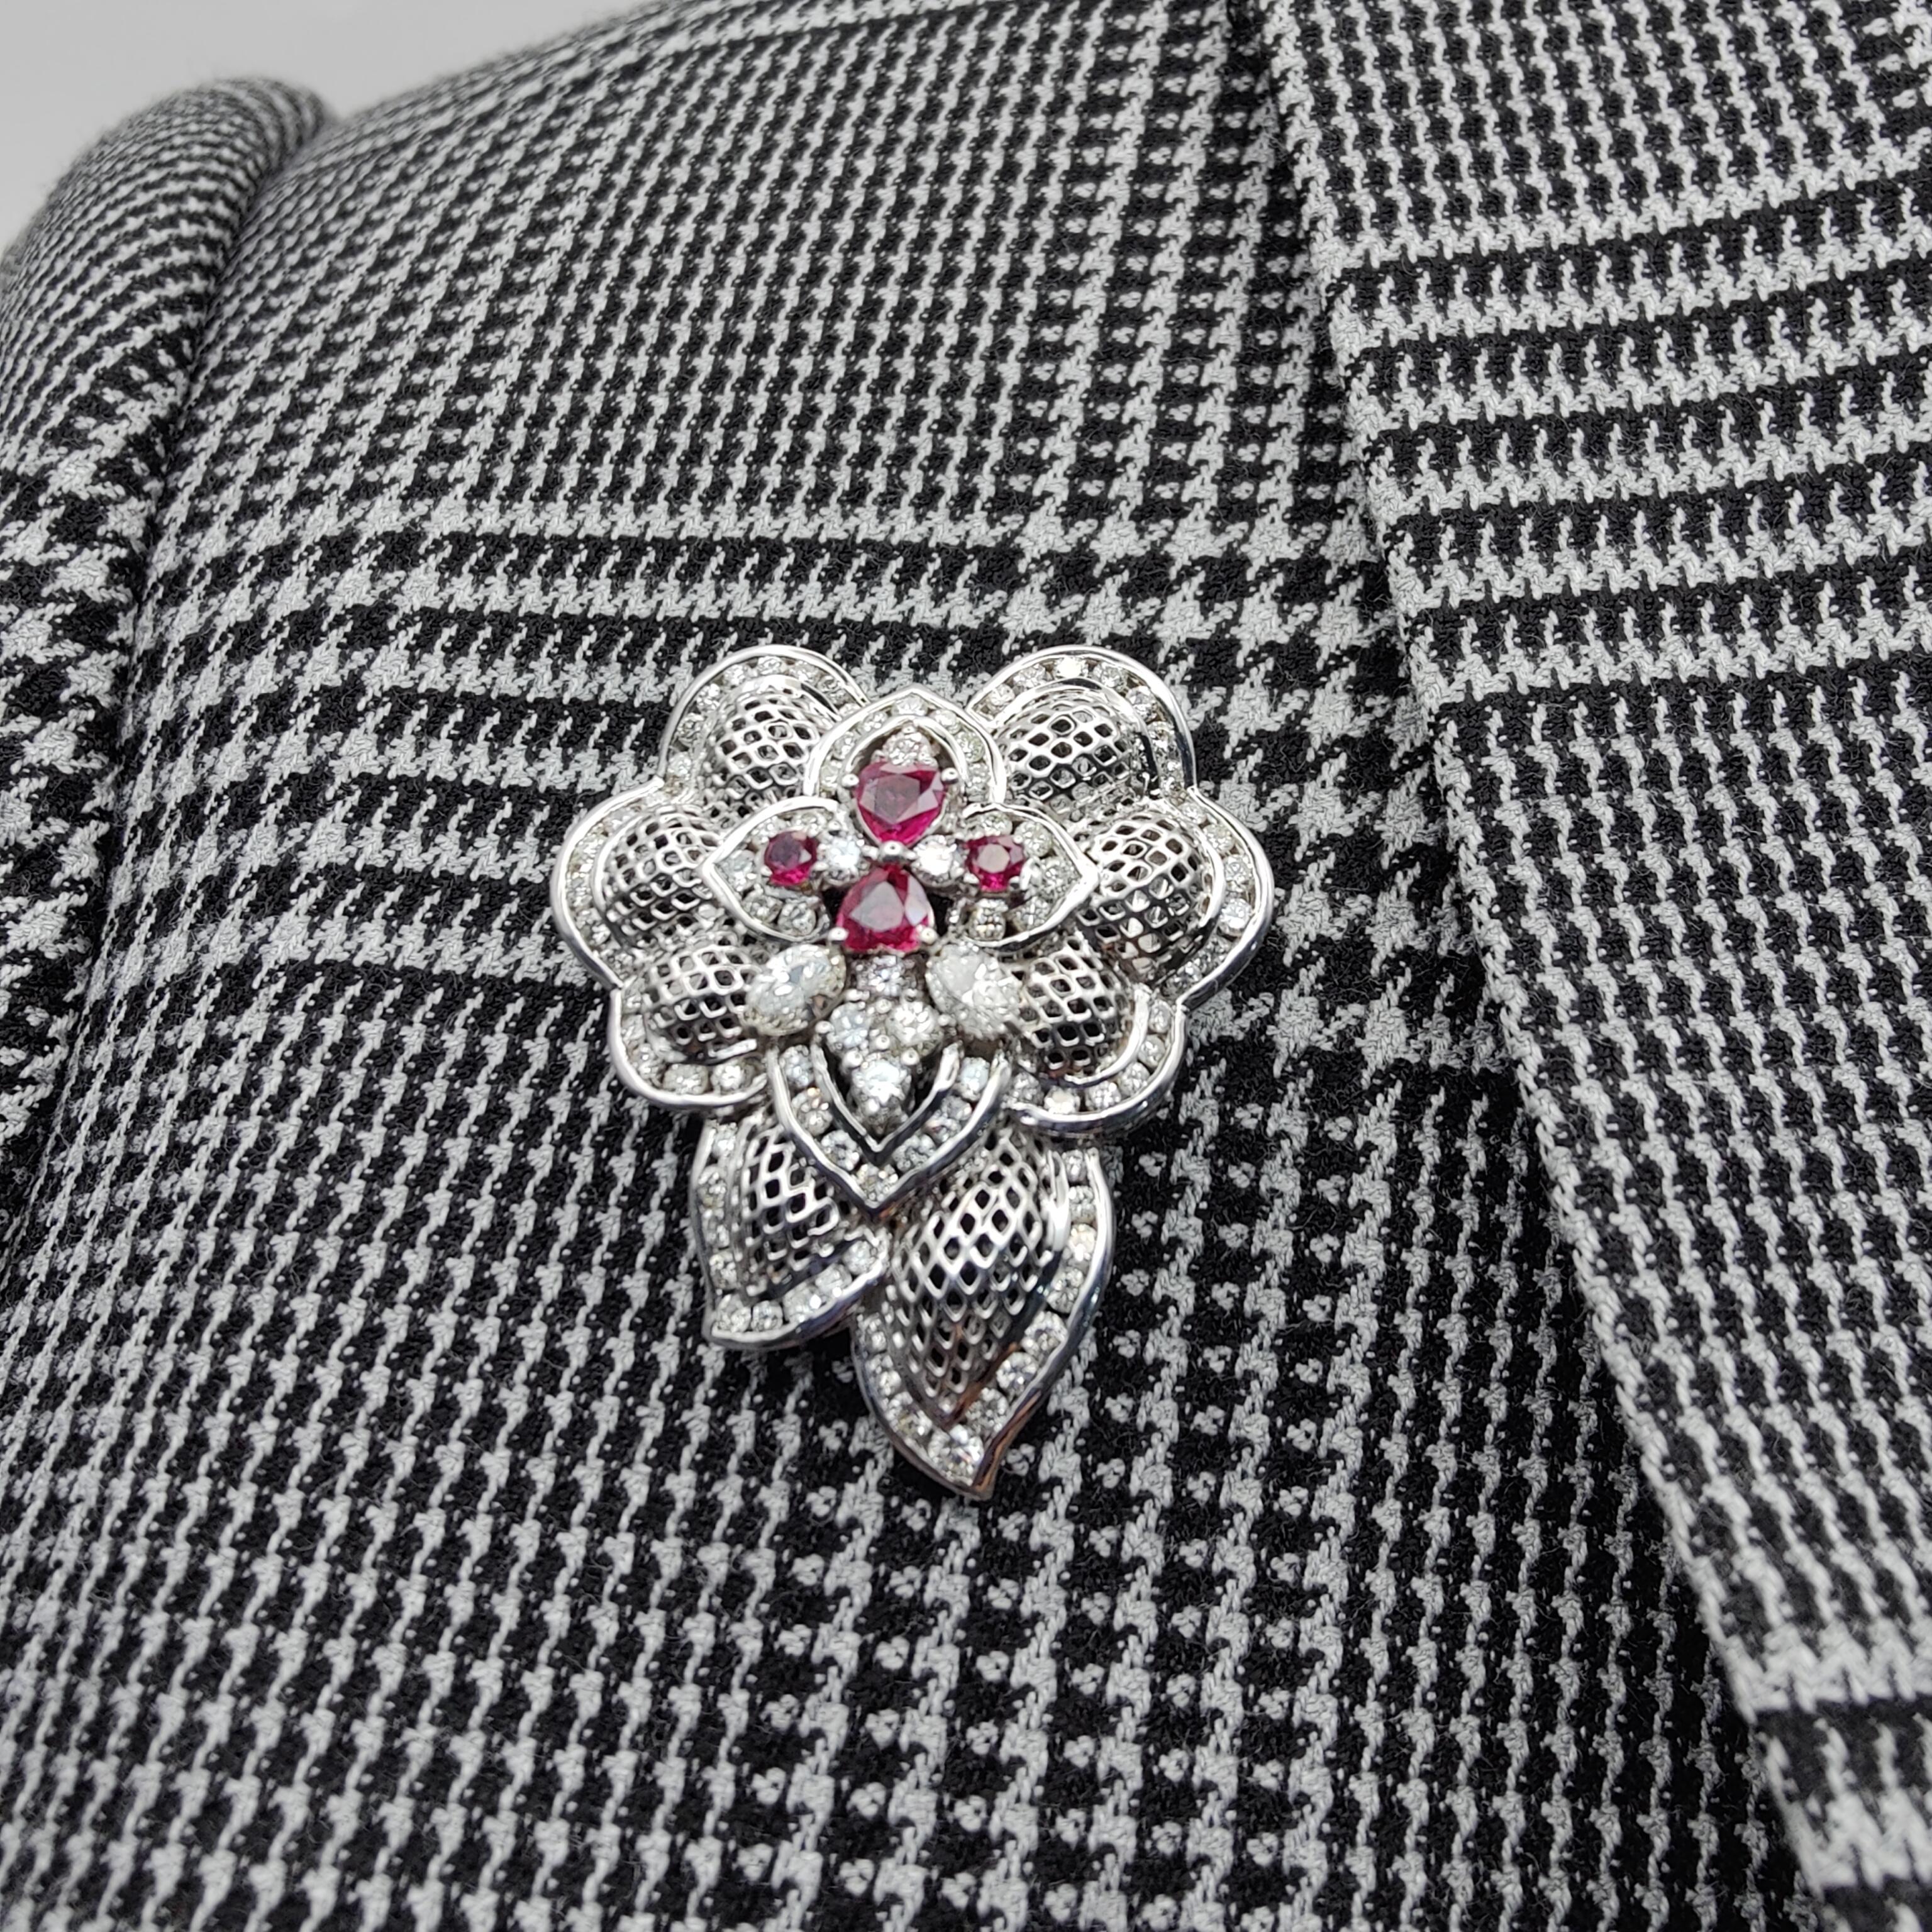 Baroque 0.78 Carat Ruby and 2.7 Carat Diamond Pendant Brooch in 18k White Gold For Sale 4